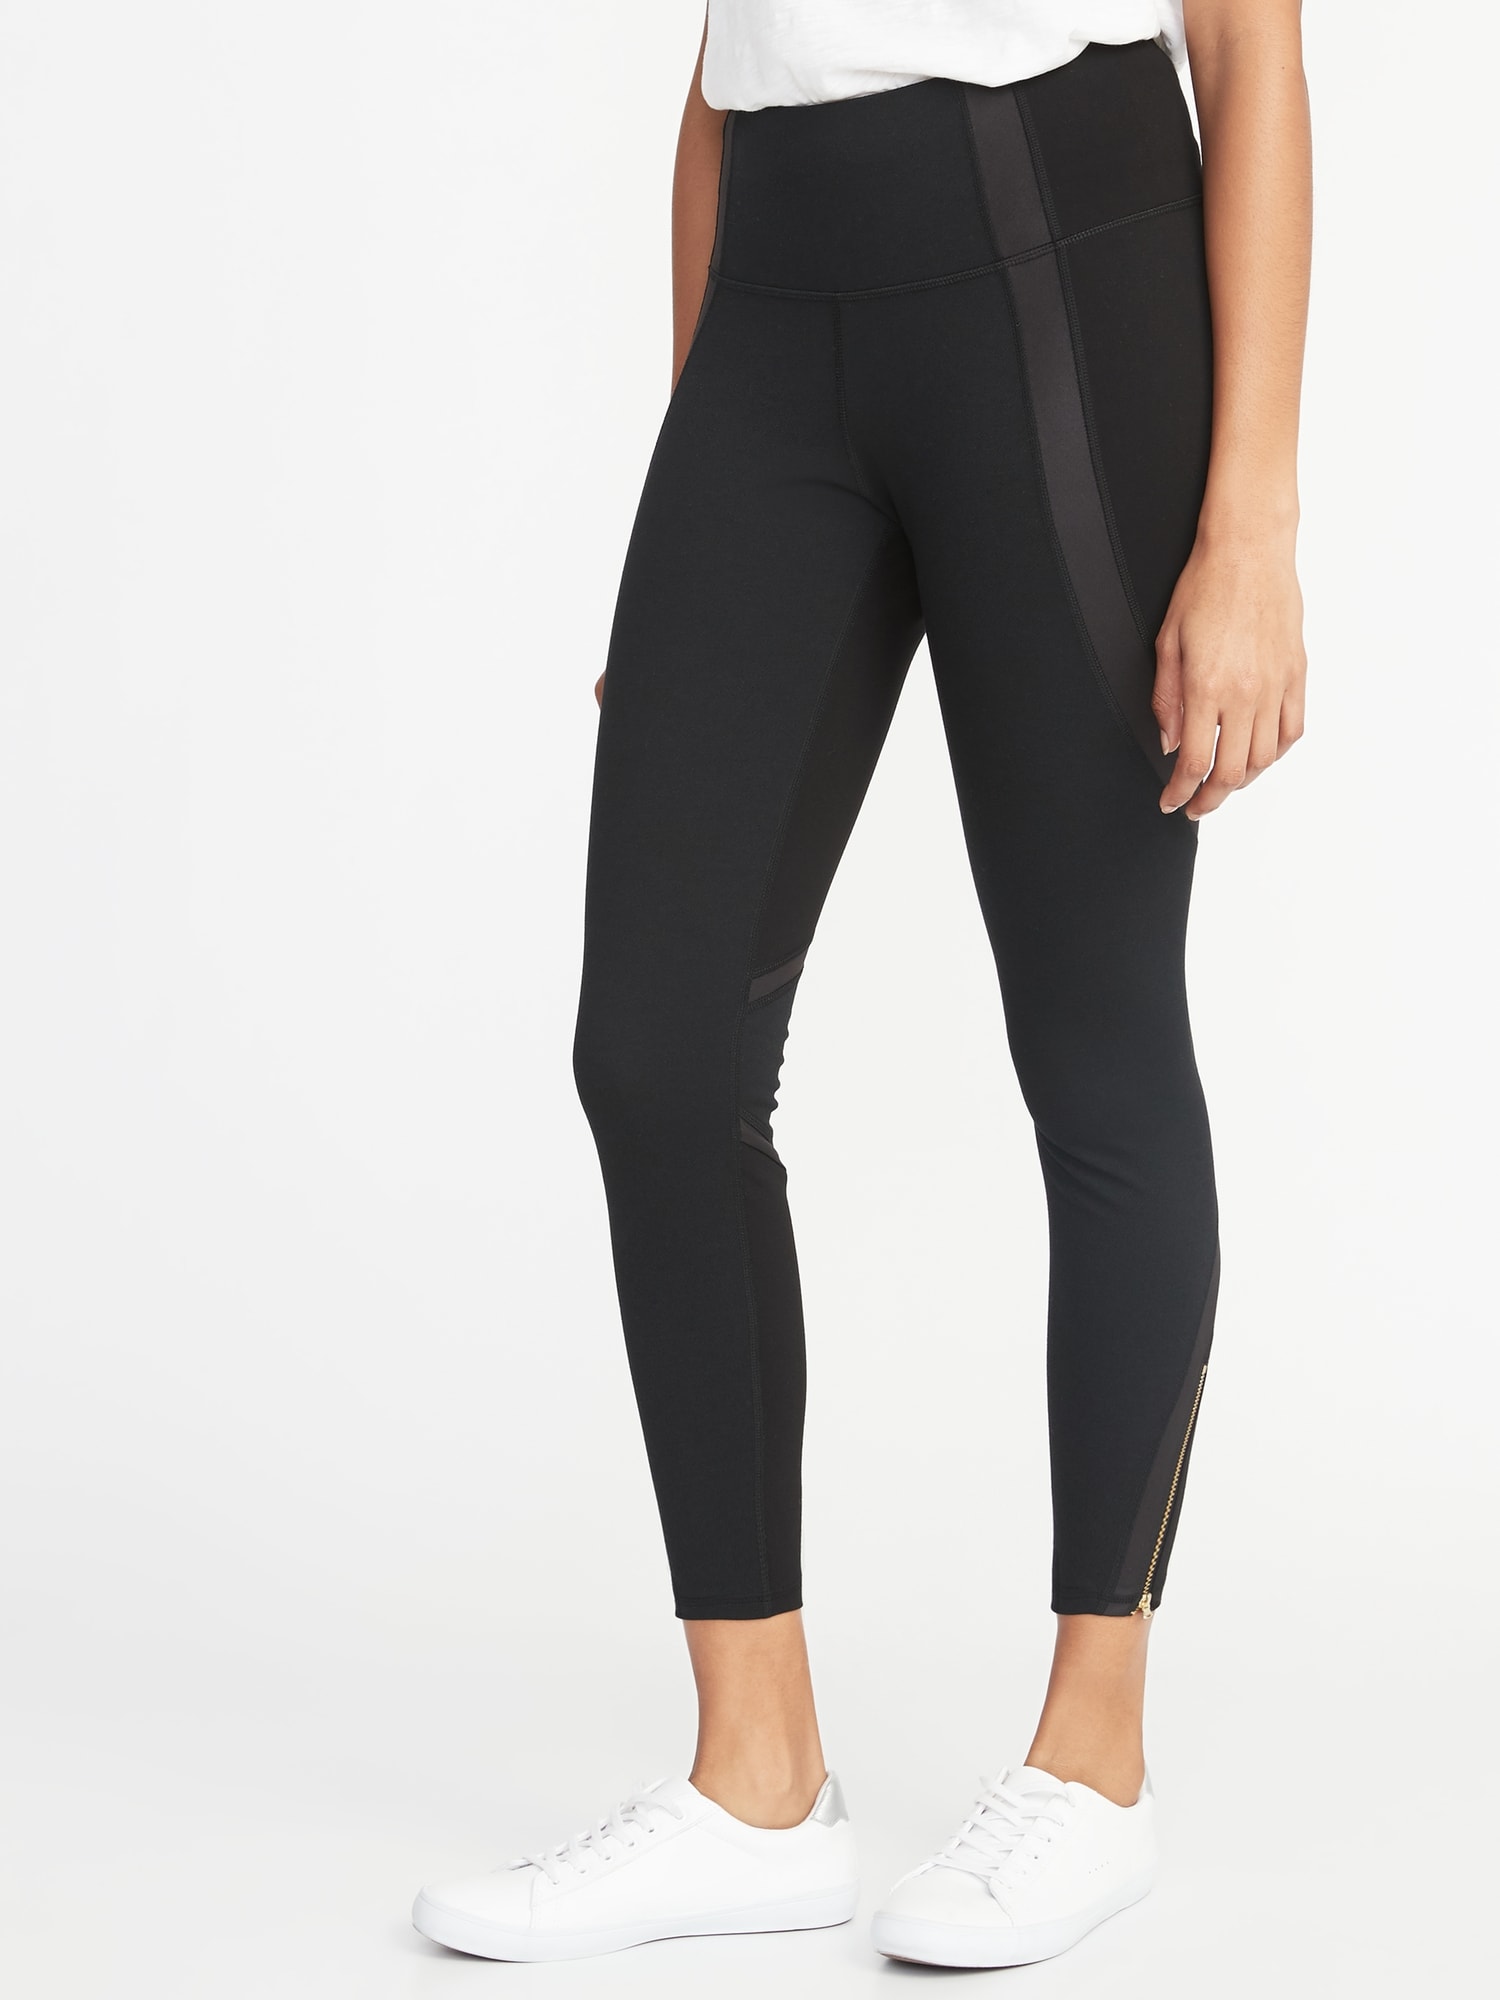 Ponte Stretch Leggings at Cotton Traders